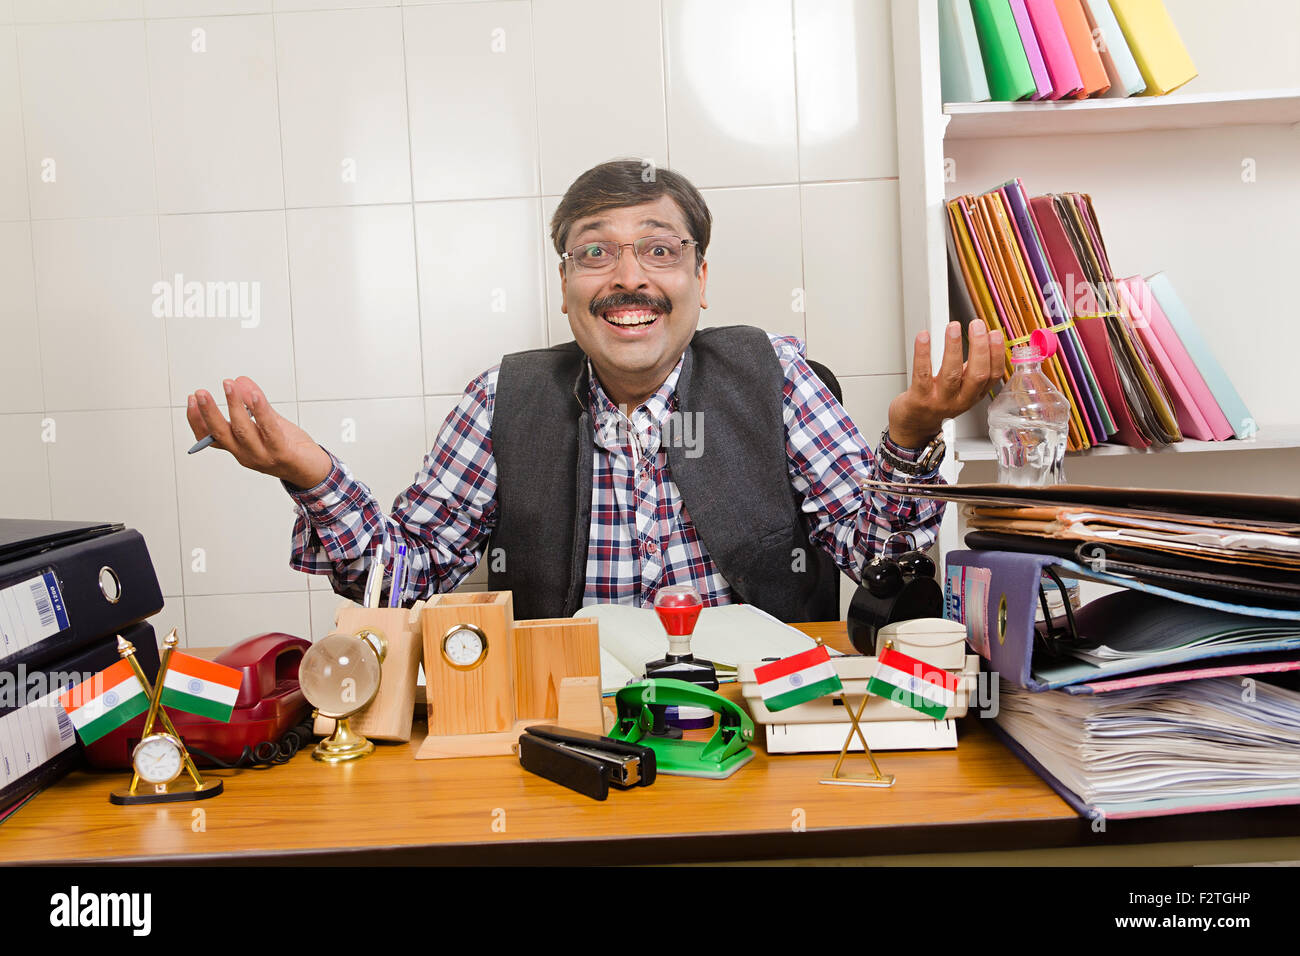 1 Indian Man Government Employee Office Working Stock Photo 878210